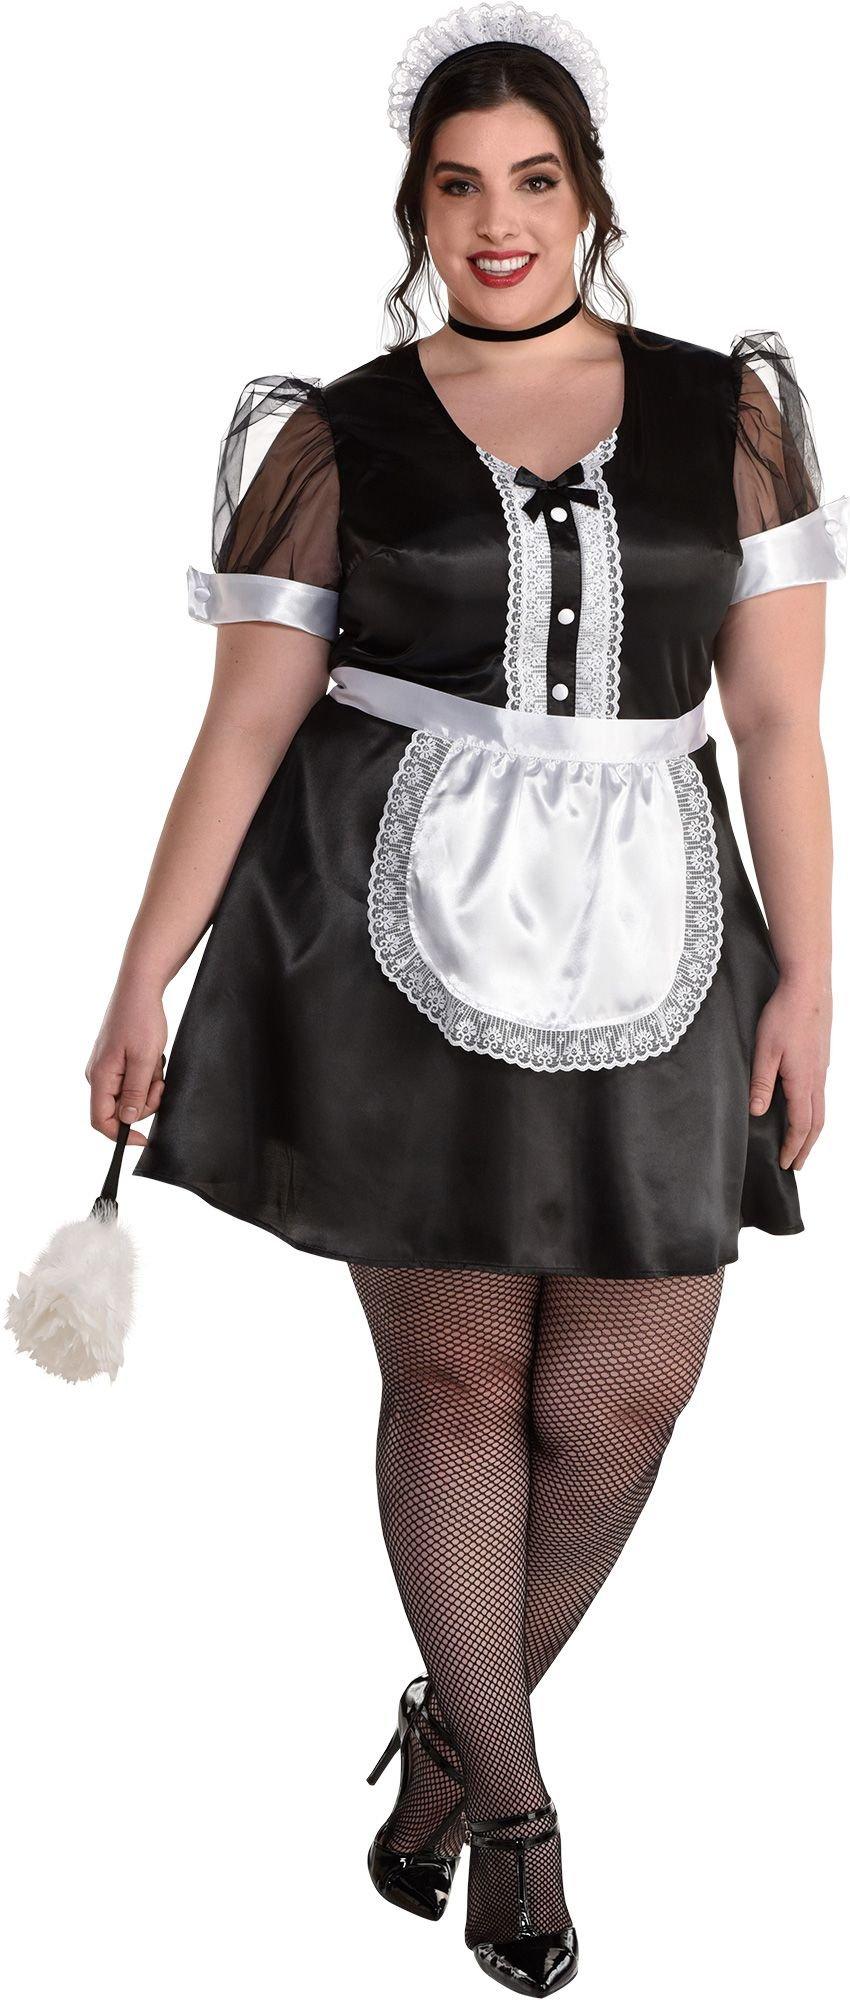 Adult Sassy Maid Costume - Plus Size | Party City